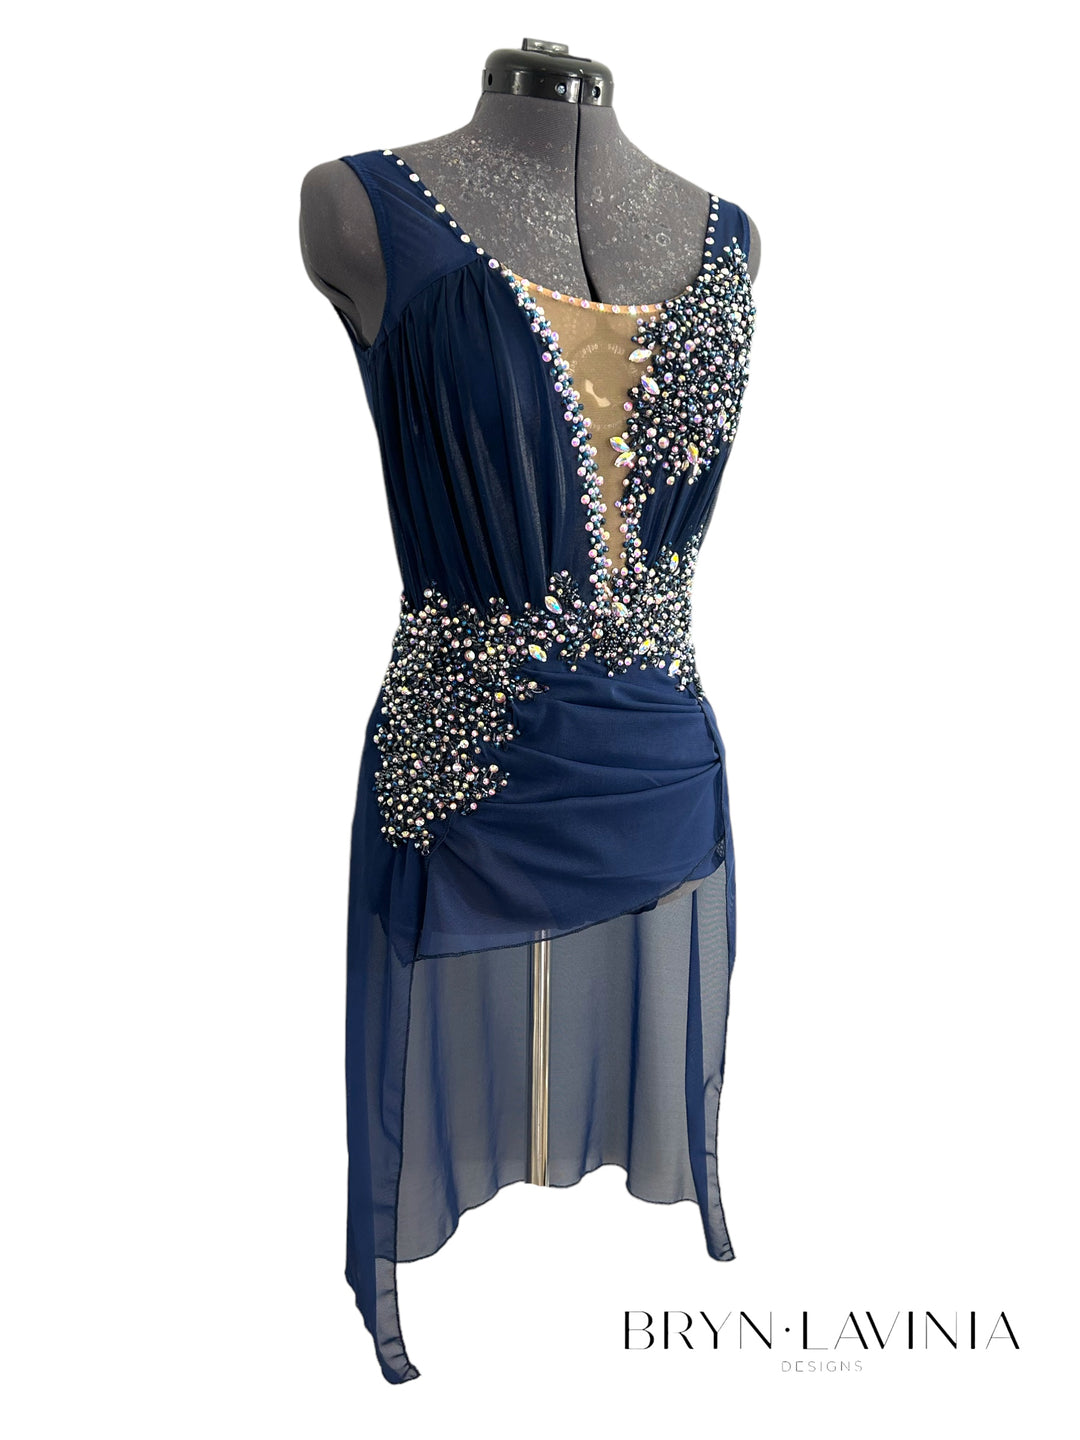 NEW Adult S/M navy blue ready to ship costume